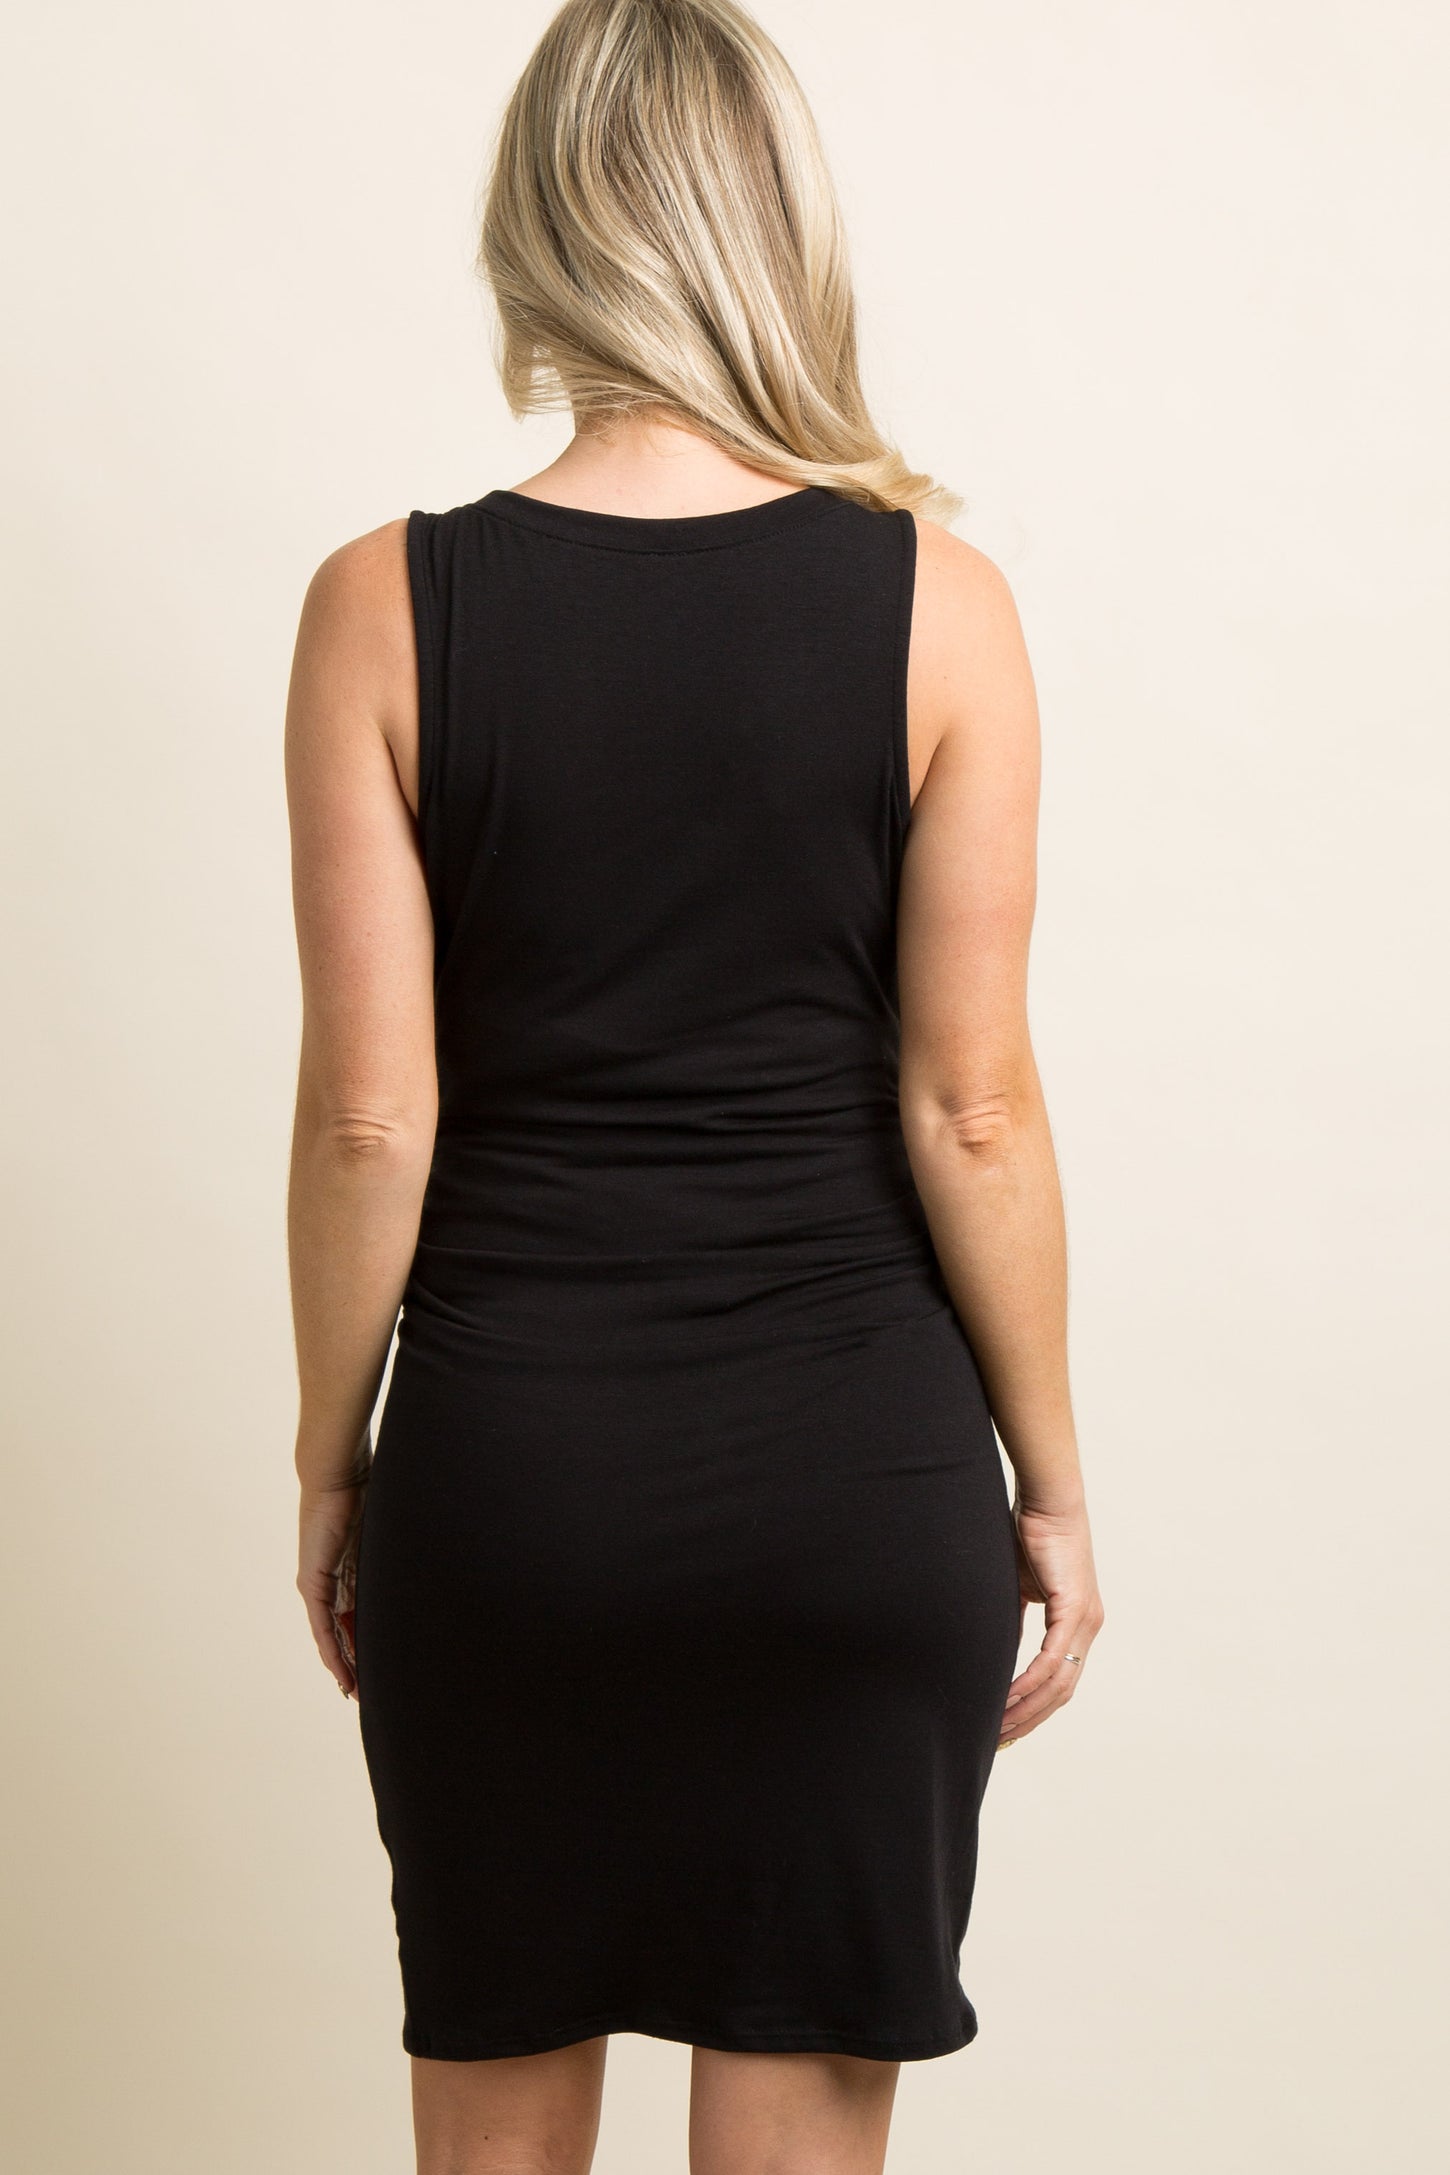 PinkBlush Black Sleeveless Ruched Fitted Maternity Dress